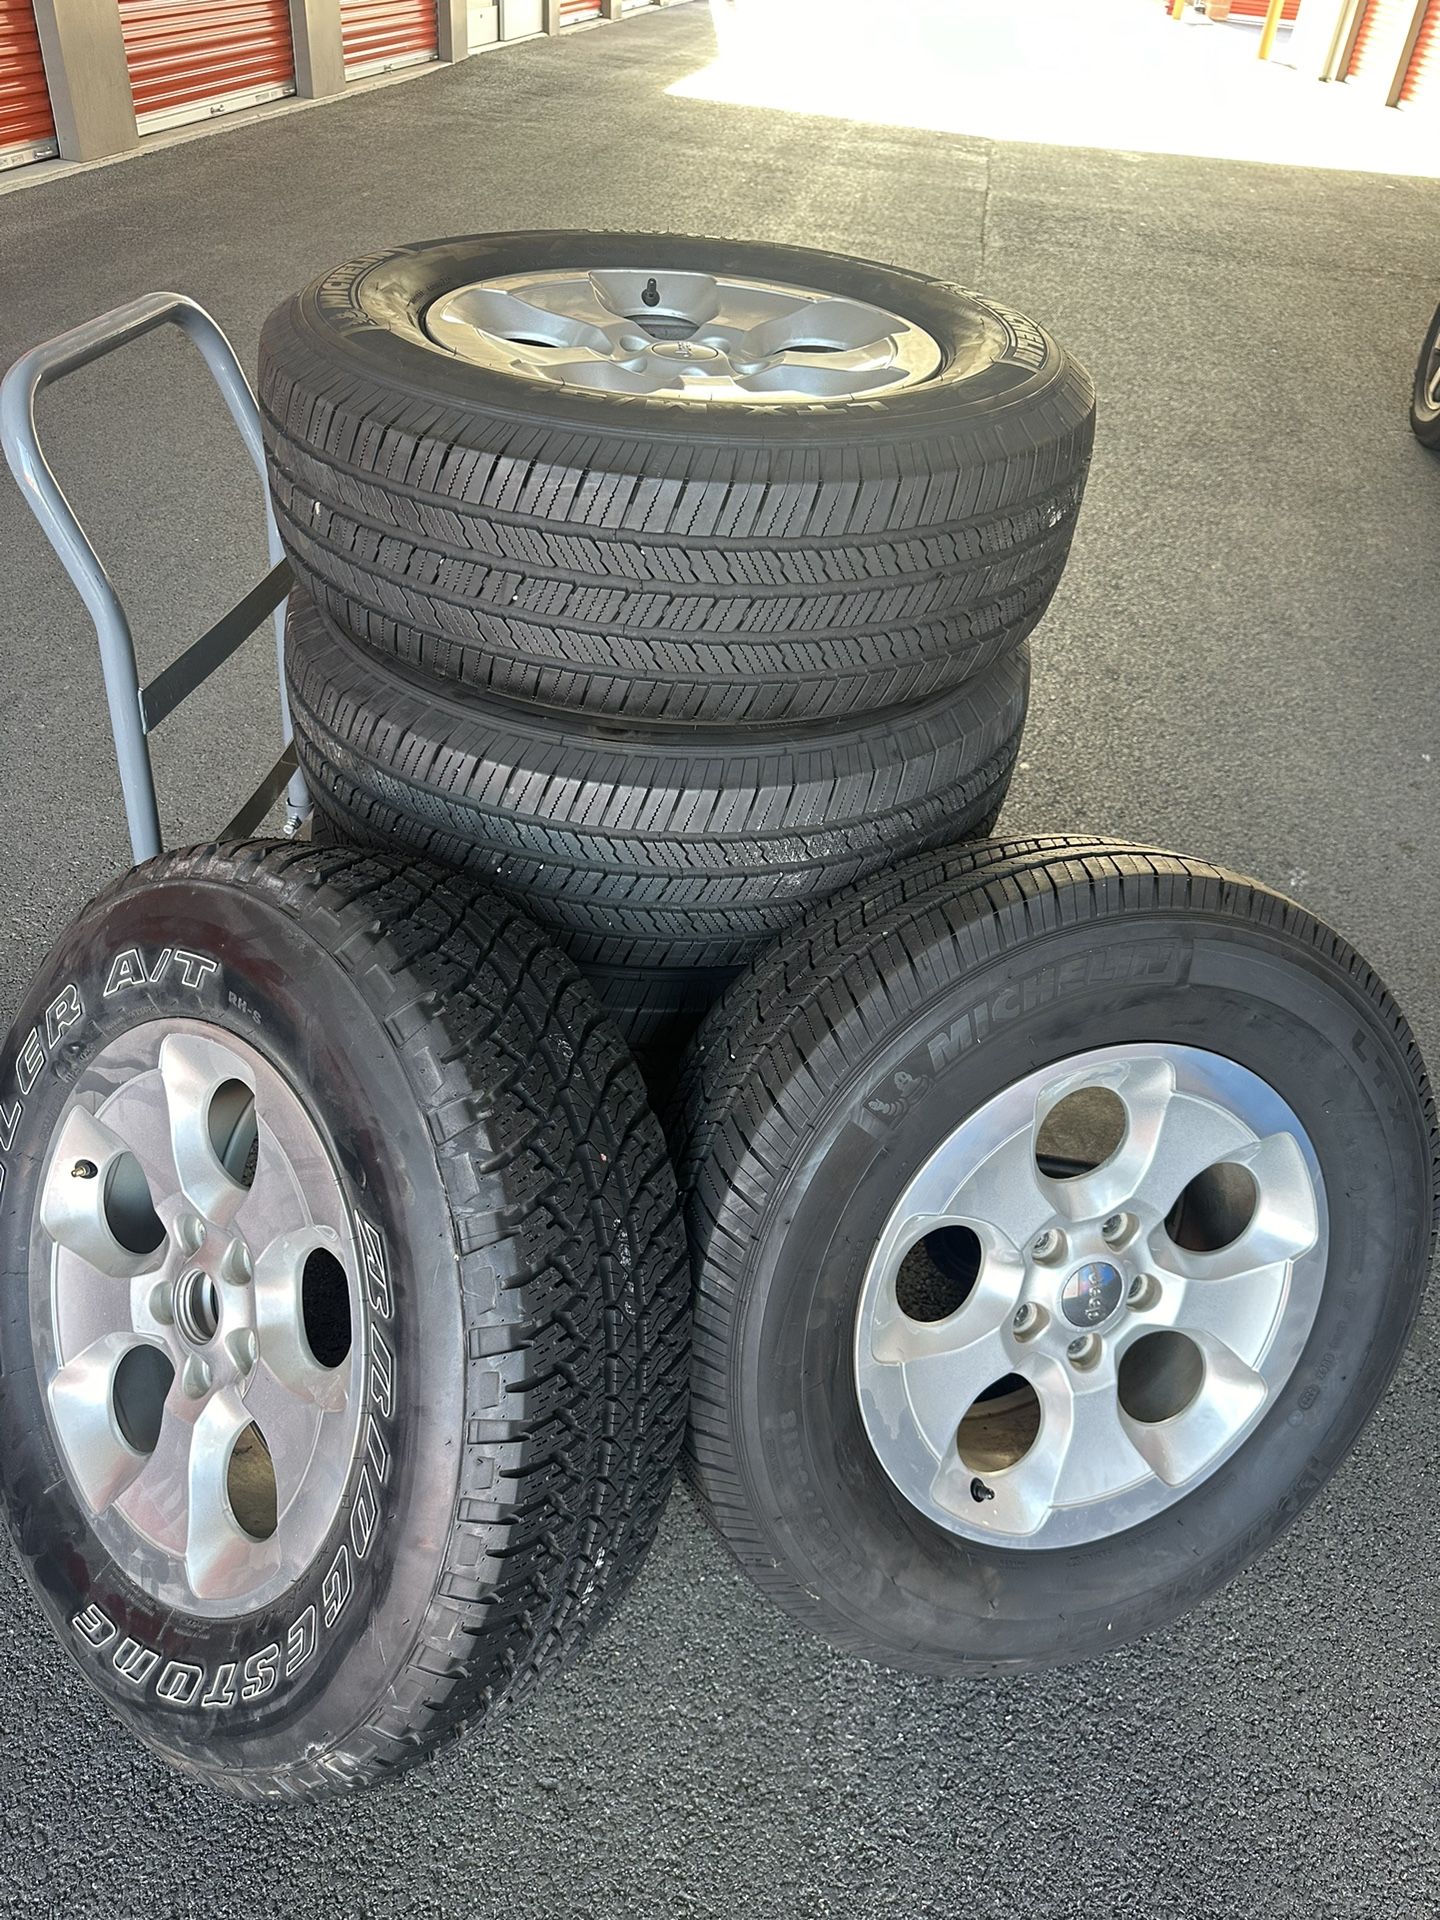 5 Jeep Wrangler 18” Sahara Alloy wheels with tires including brand new spare - 255 70 18 Michelin 